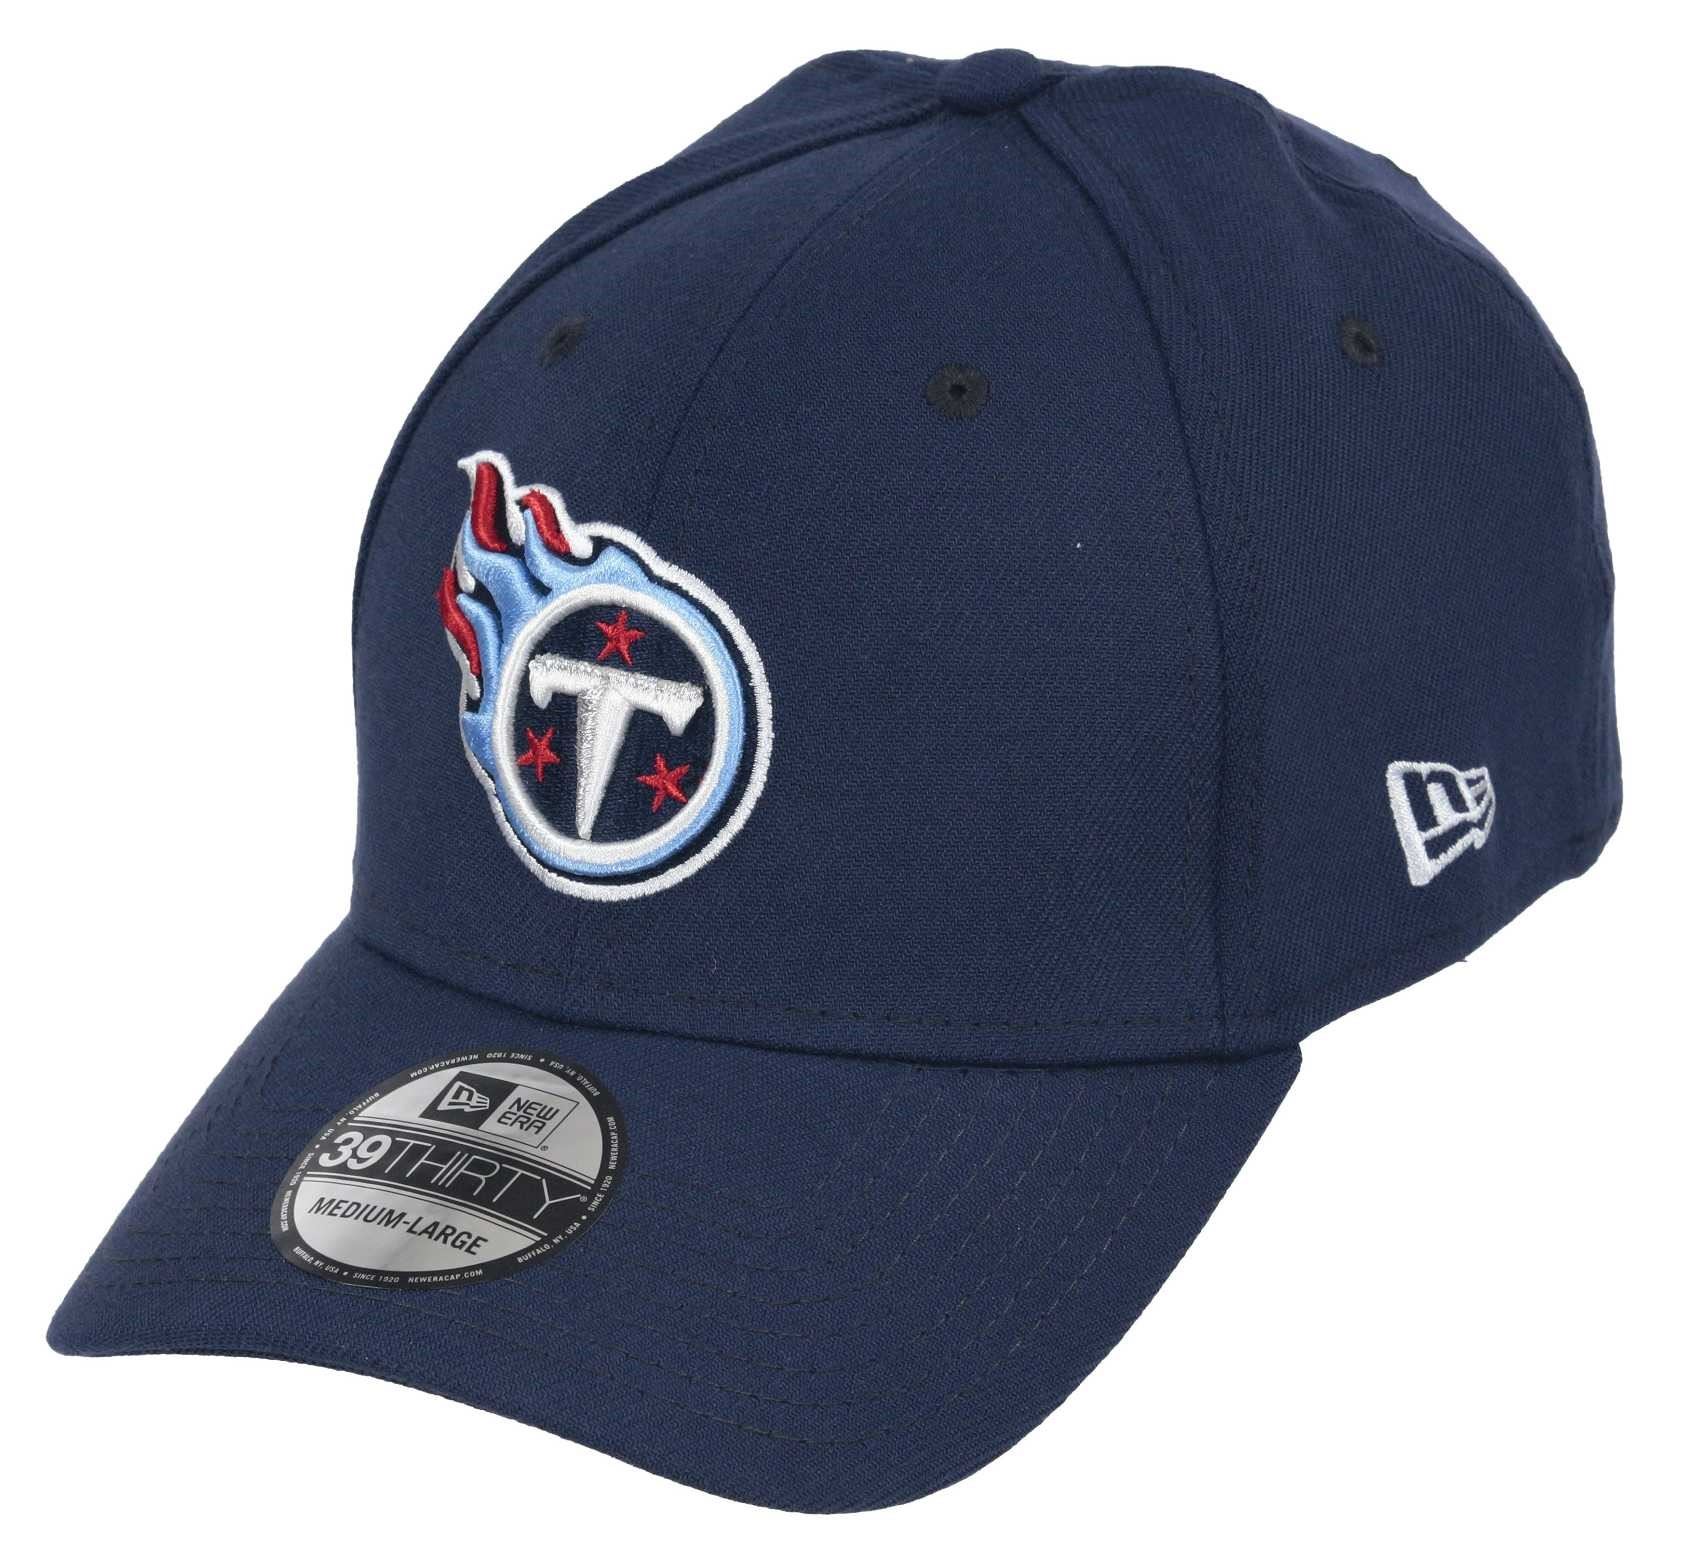 Tennessee Titans NFL Core Edition 39Thirty Stretch Cap New Era